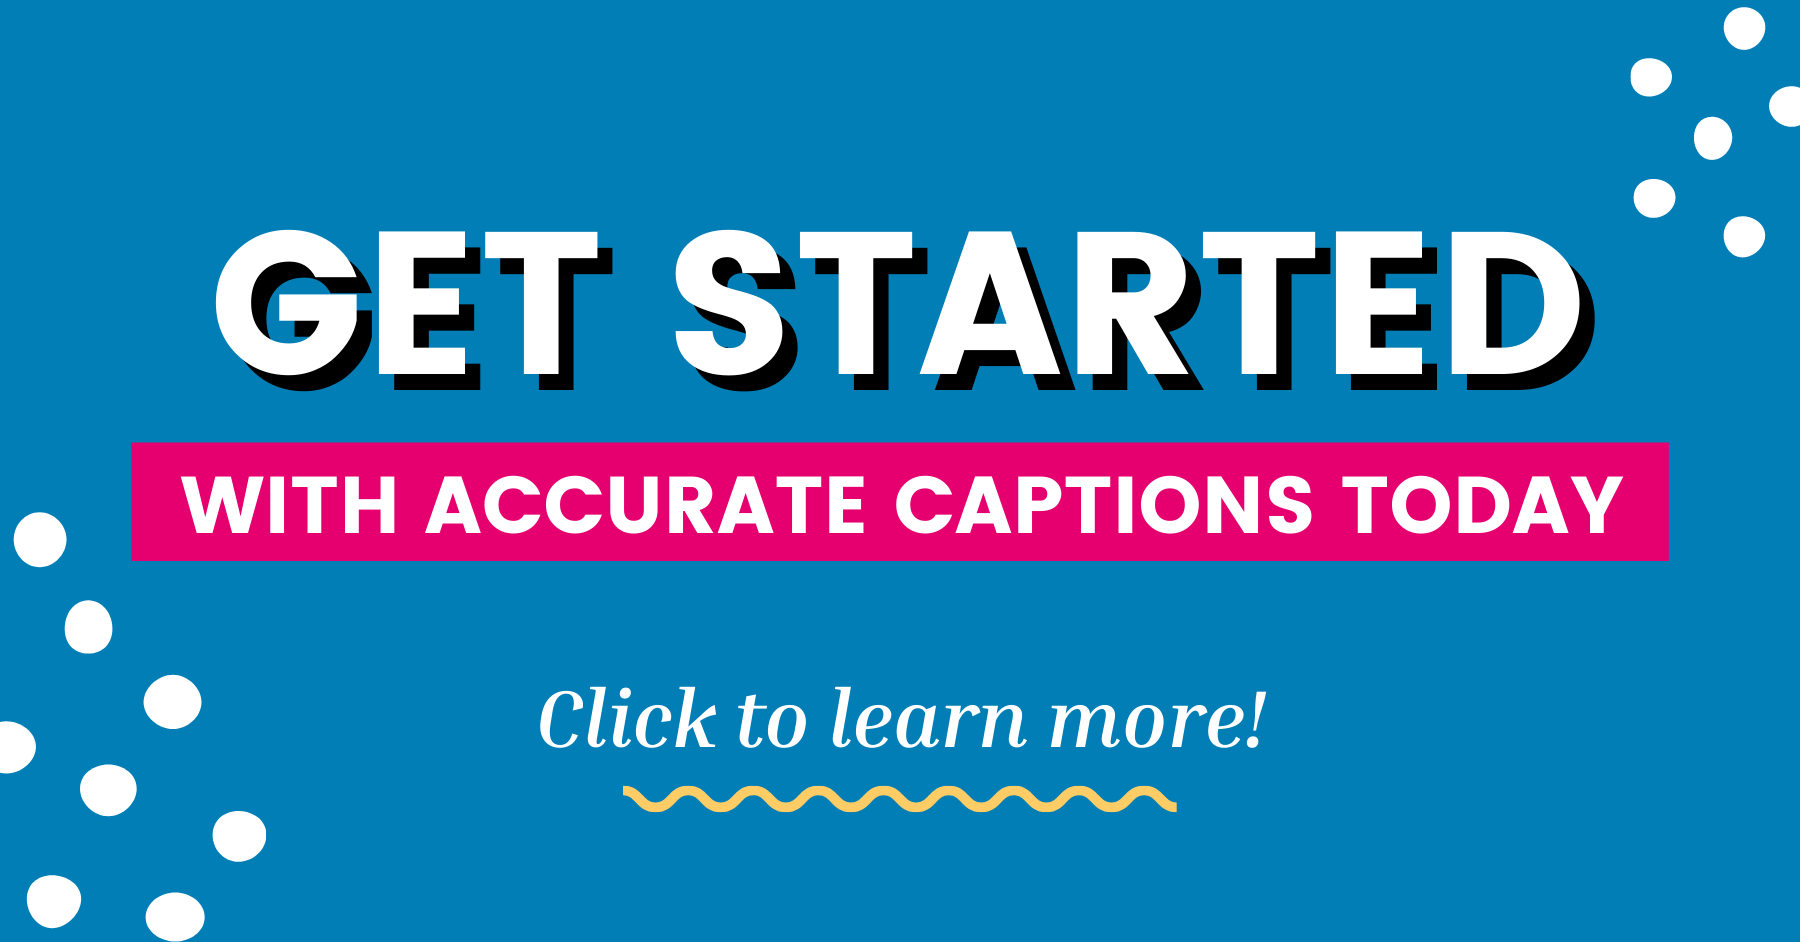 Get started with accurate captions today, click to learn more!